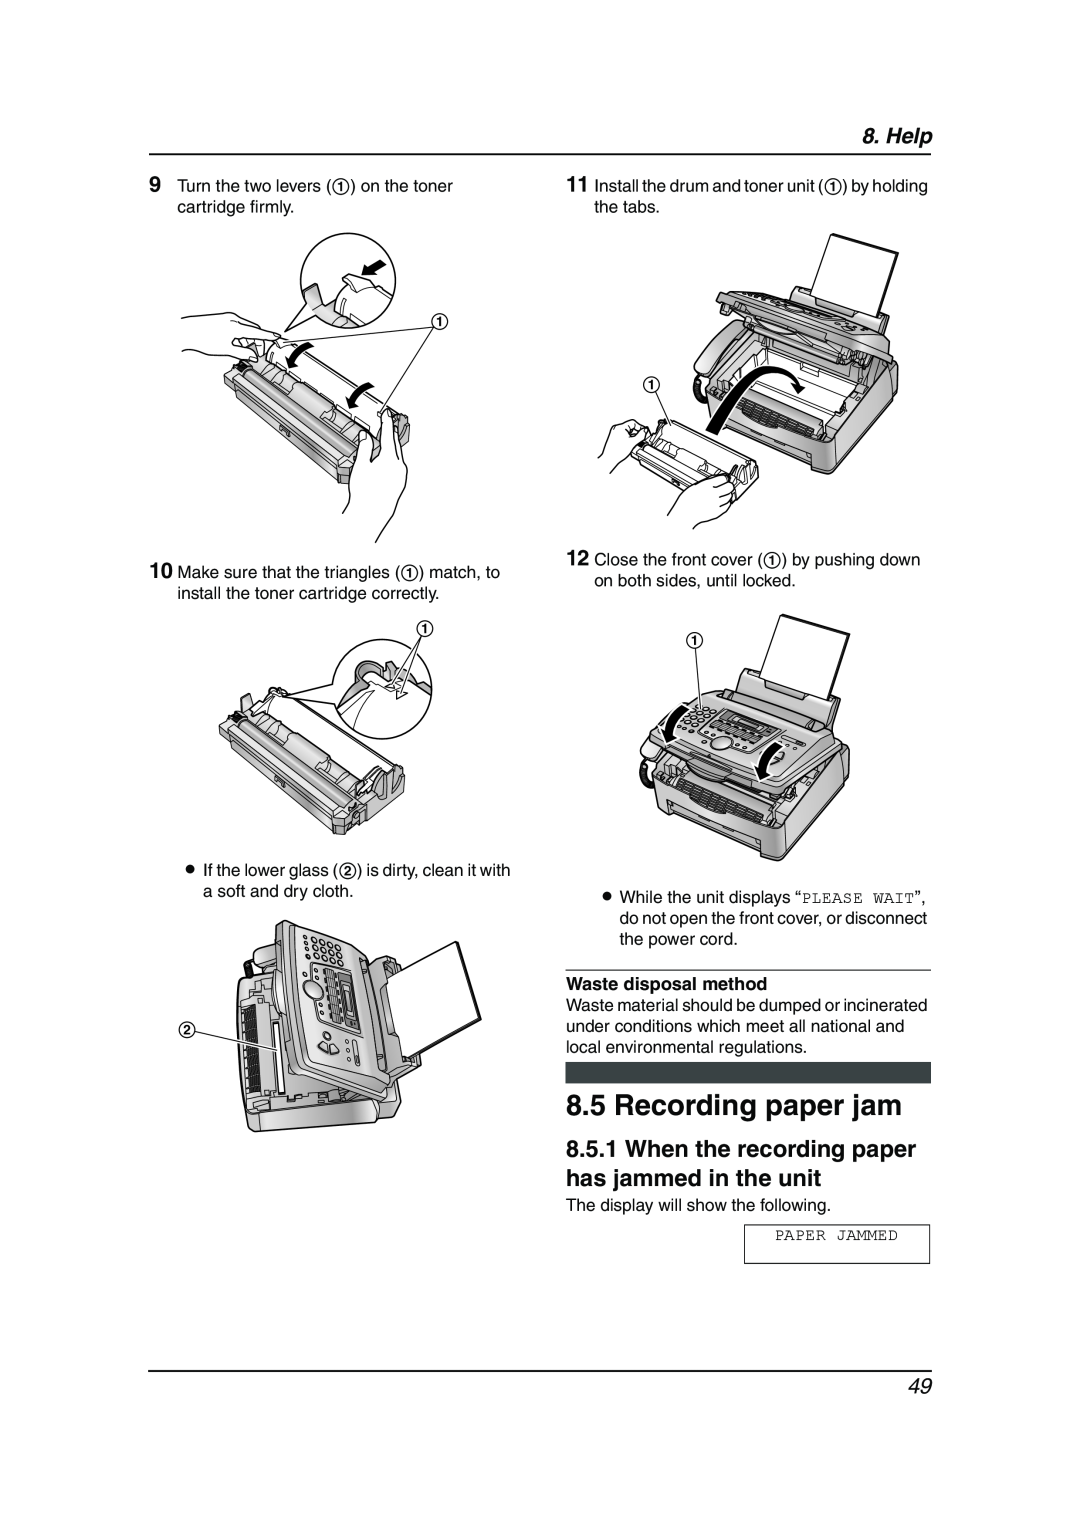 Panasonic KX-FL511AL manual Recording paper jam, When the recording paper has jammed in the unit, Help 